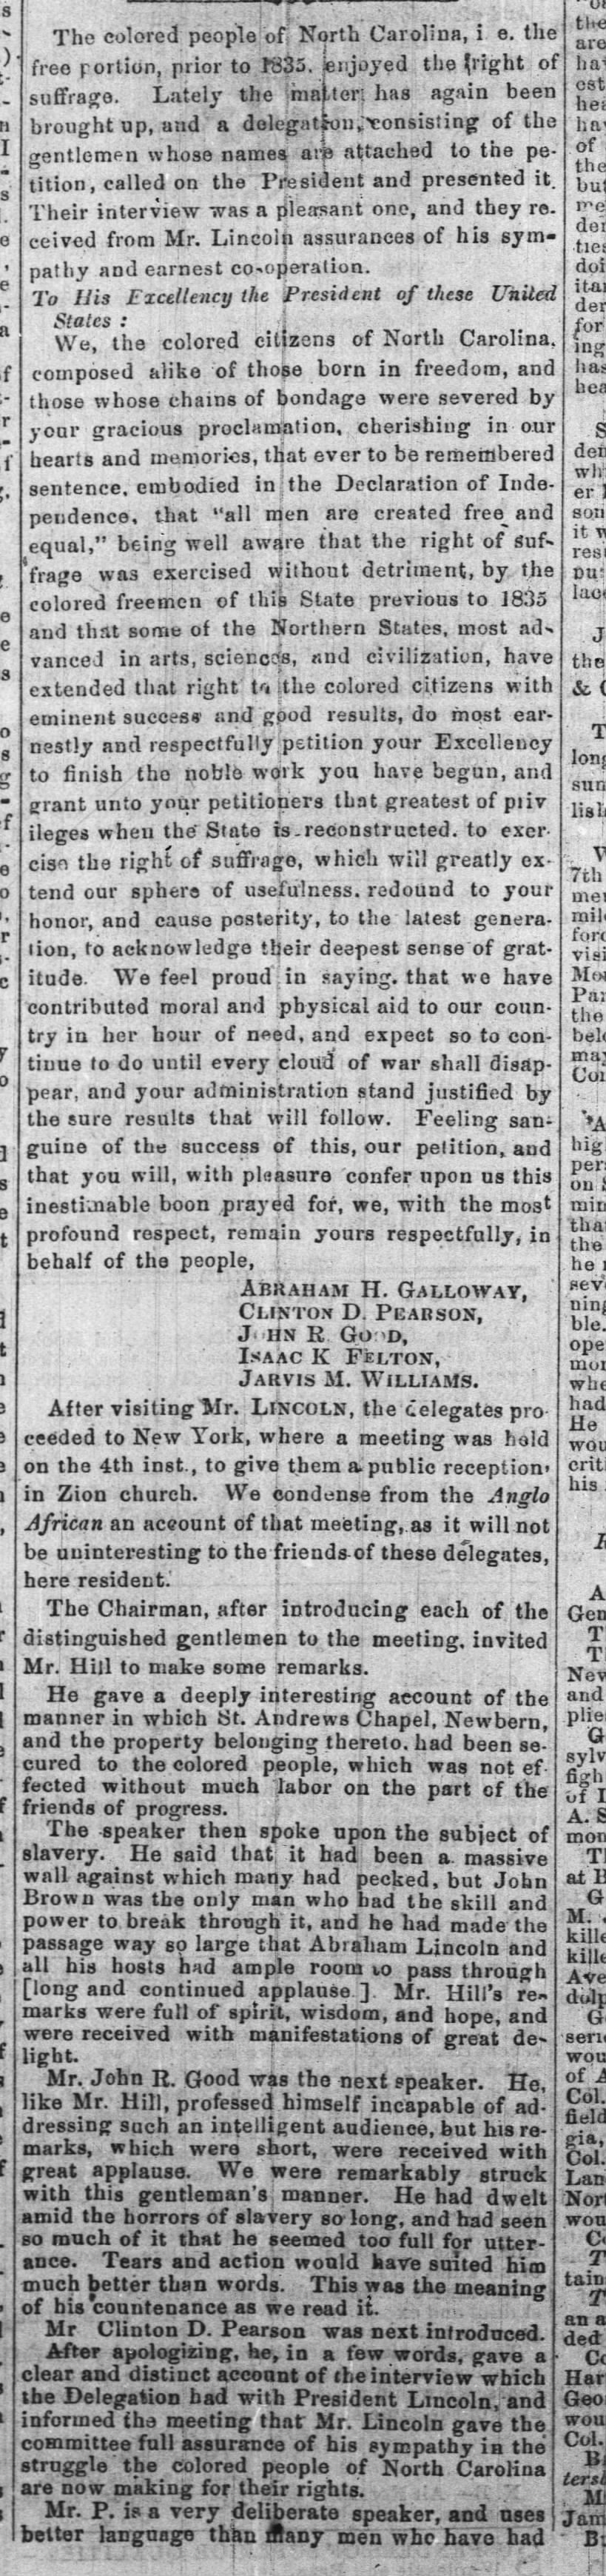 1864 New Bernians visit Lincoln, col. 1